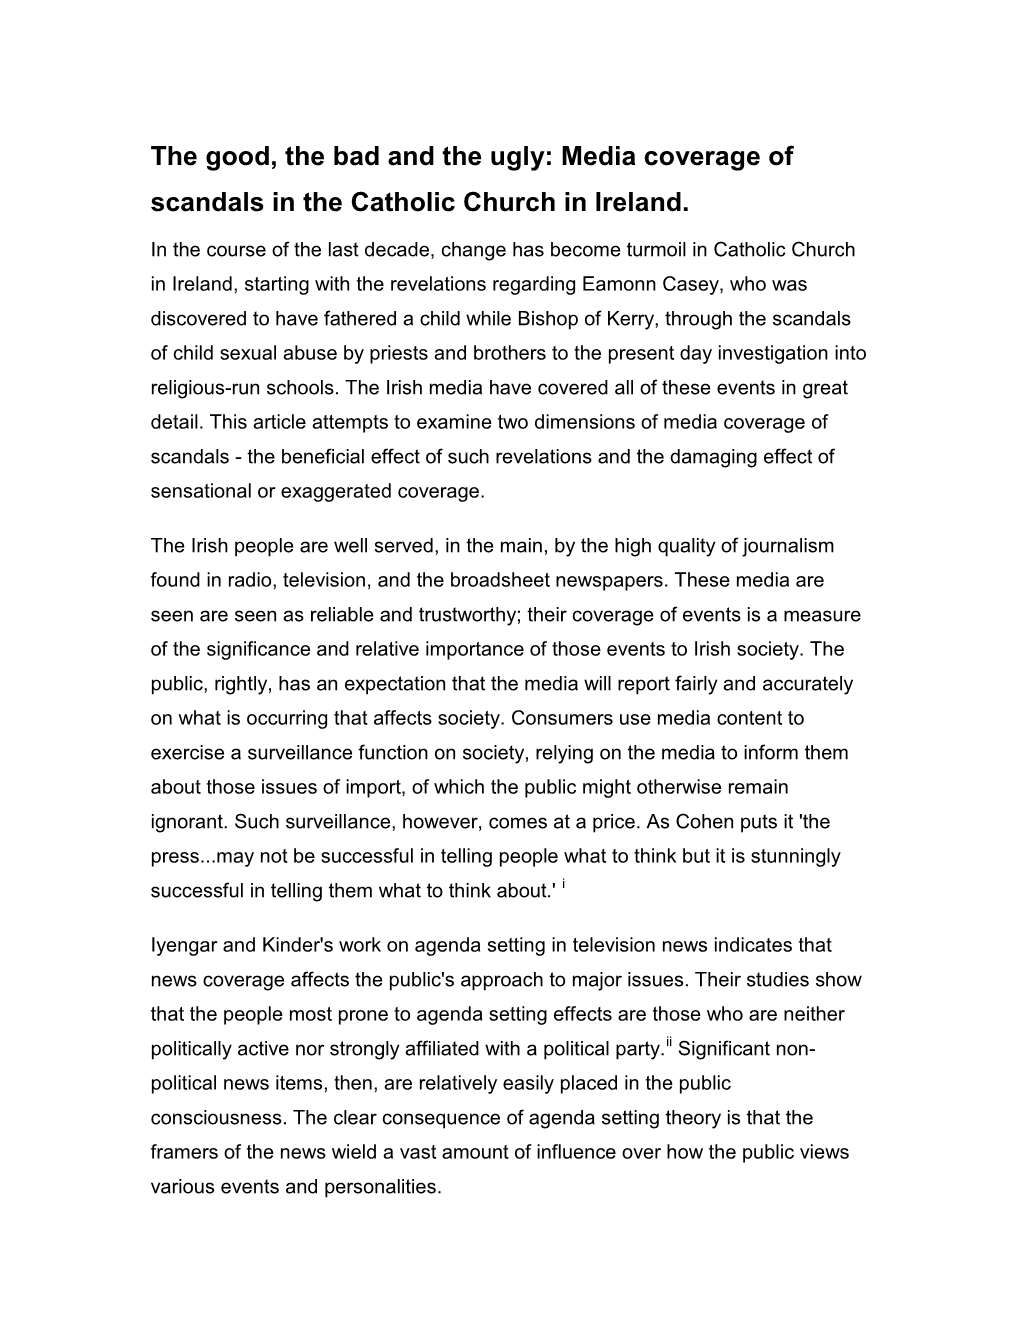 Media Coverage of Scandals in the Catholic Church in Ireland